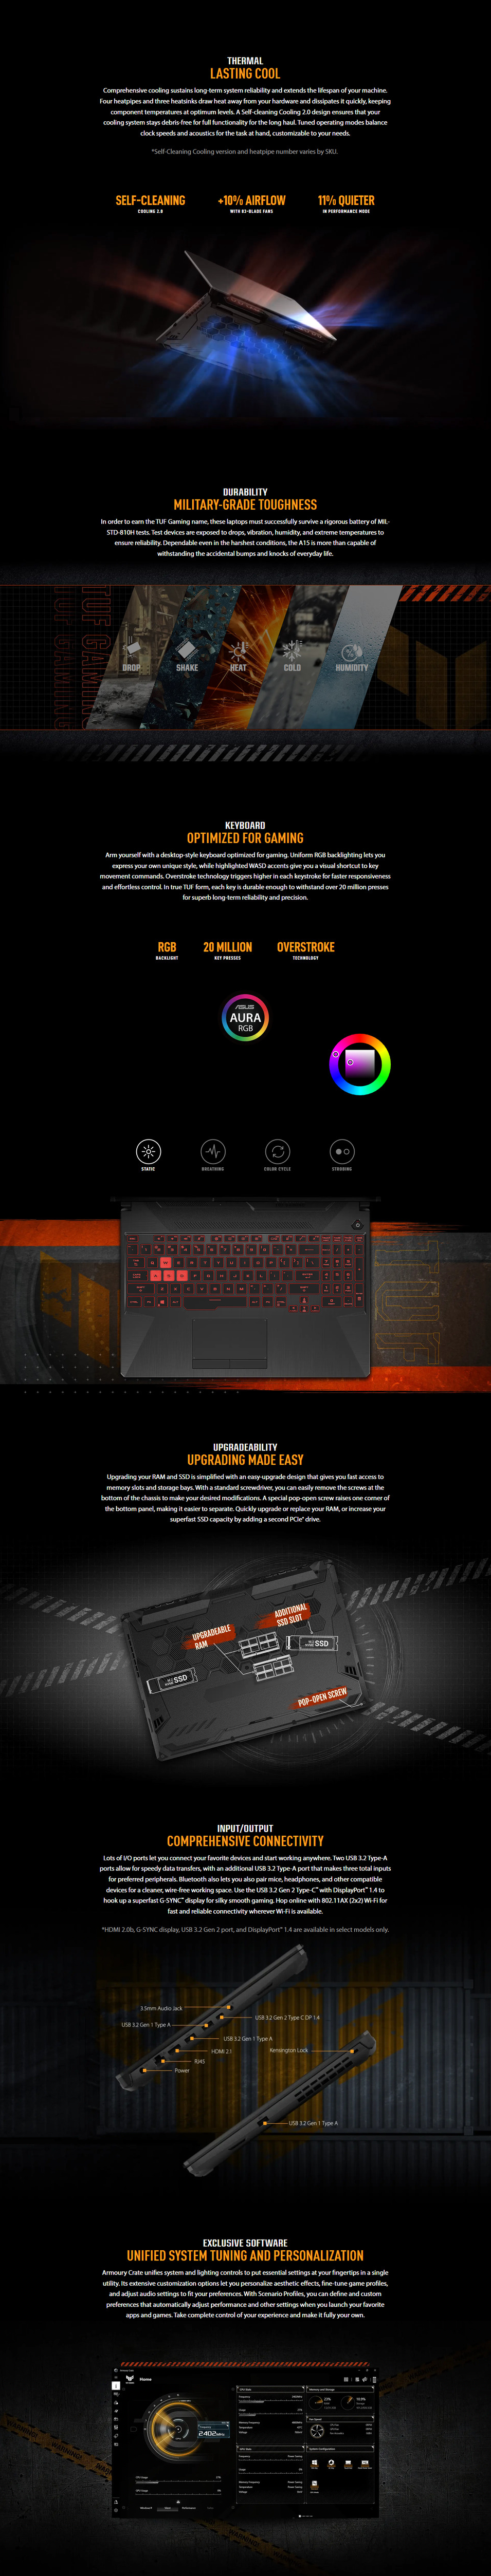 A large marketing image providing additional information about the product ASUS TUF Gaming A15 (FA506) - 15.6" 144Hz, Ryzen 5, RTX 3050, 16GB/512GB - Win 11  Notebook - Additional alt info not provided